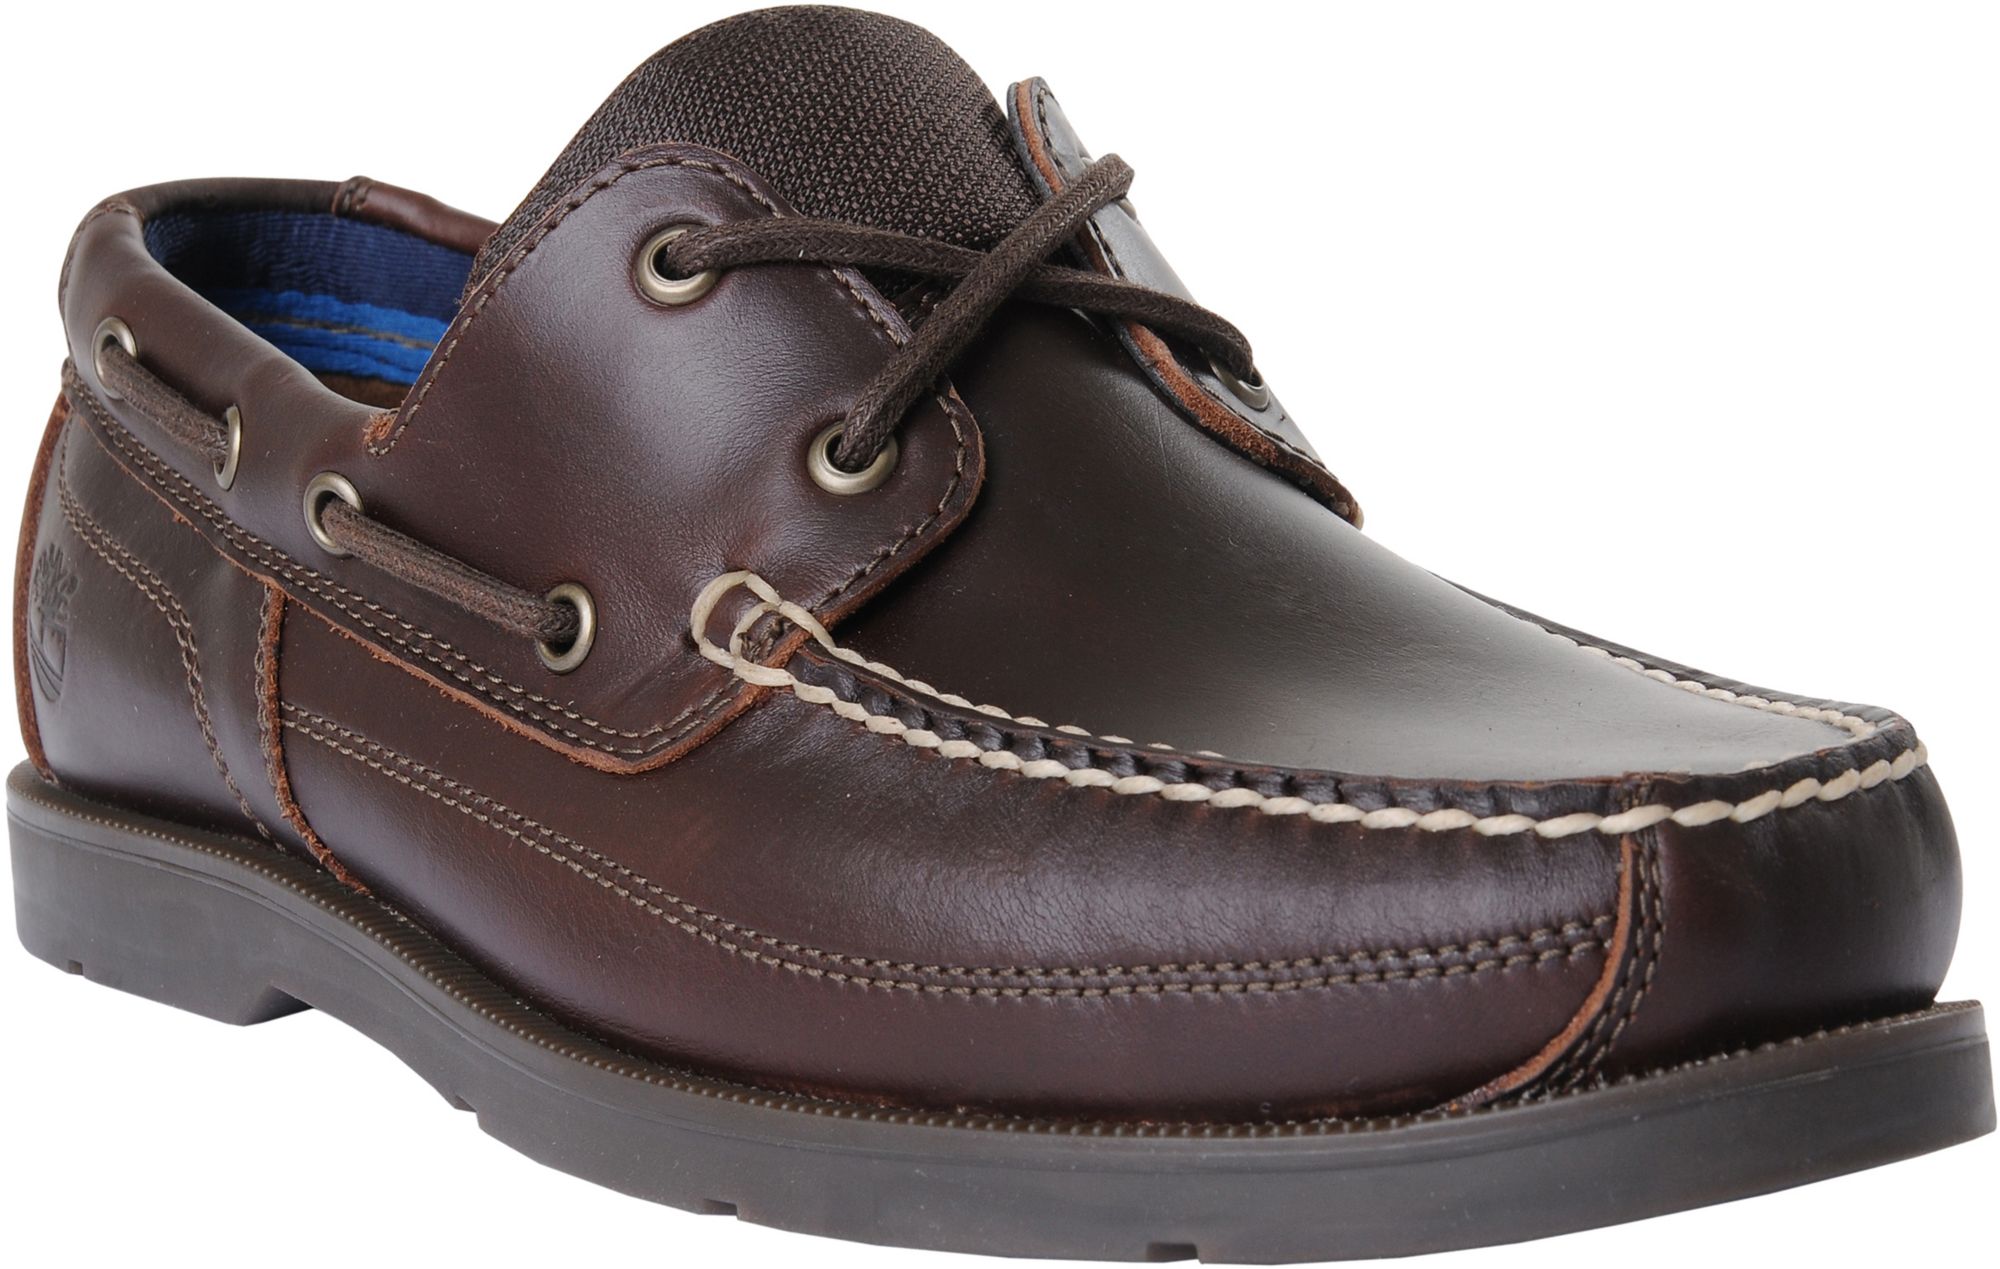 timberland piper cove boat shoes